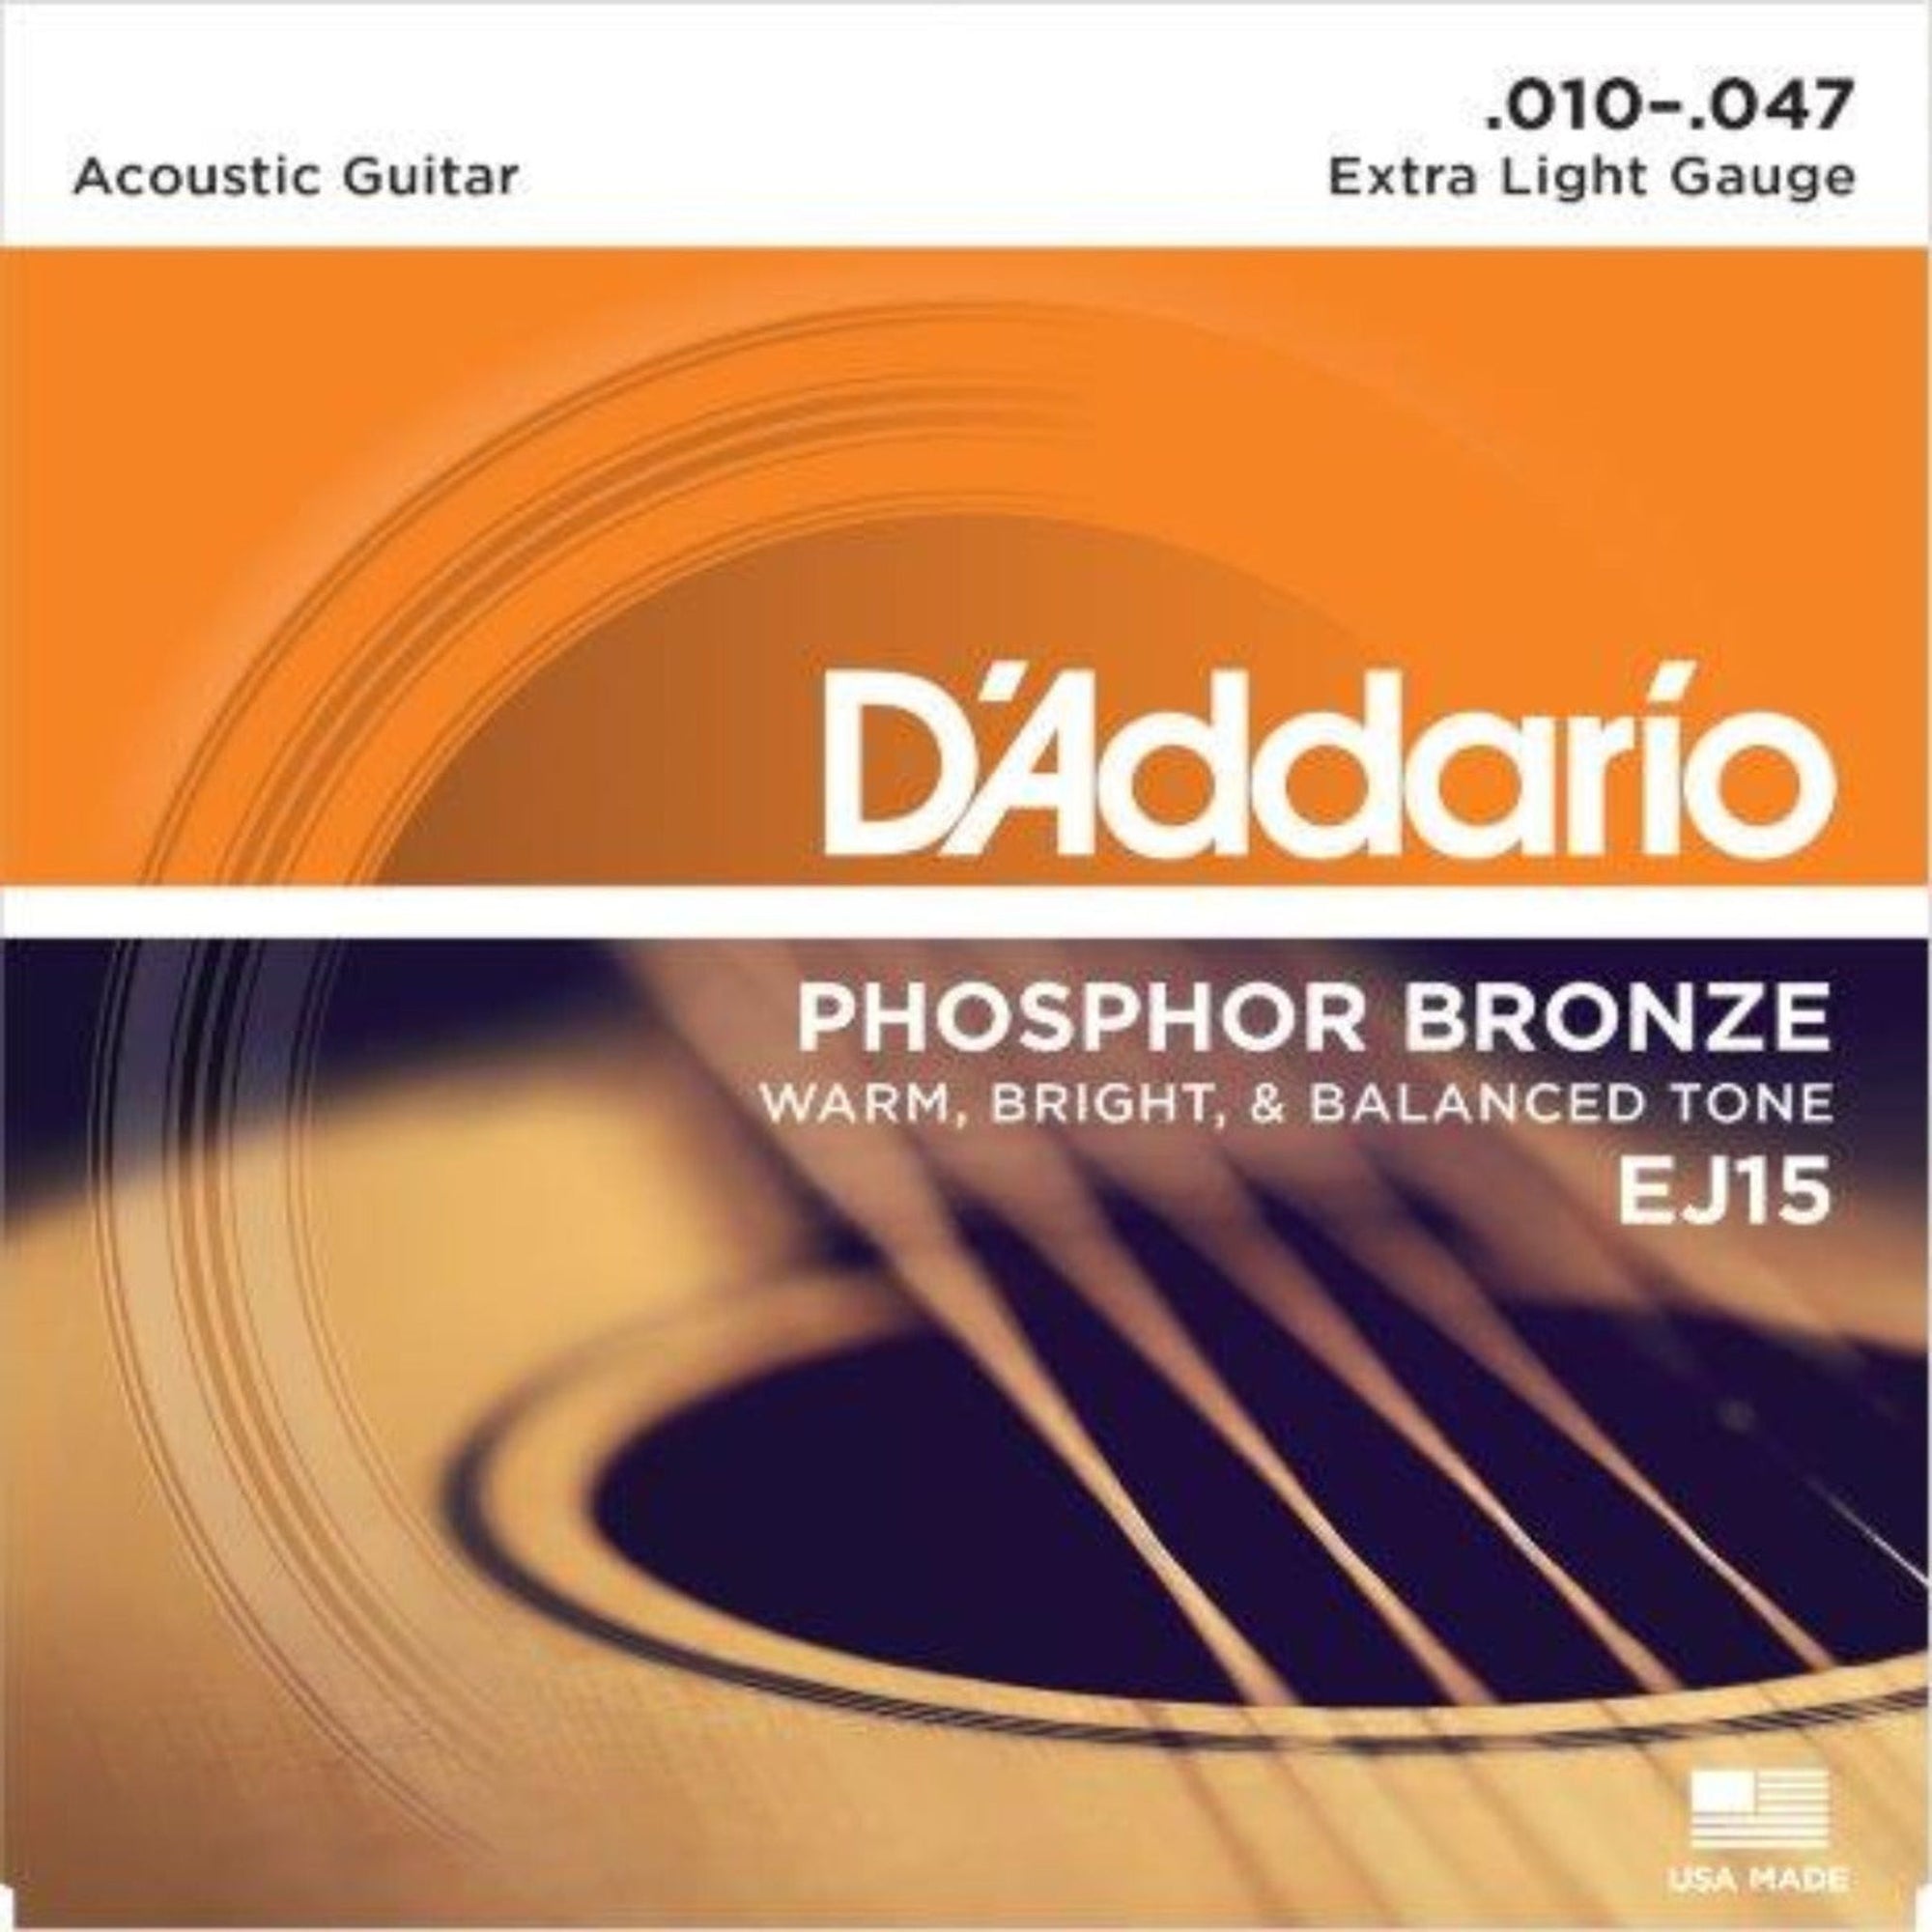 D'Addario's lightest gauge of acoustic strings, EJ15s are ideal for beginners or any player that prefers a softer tone and easy bending.